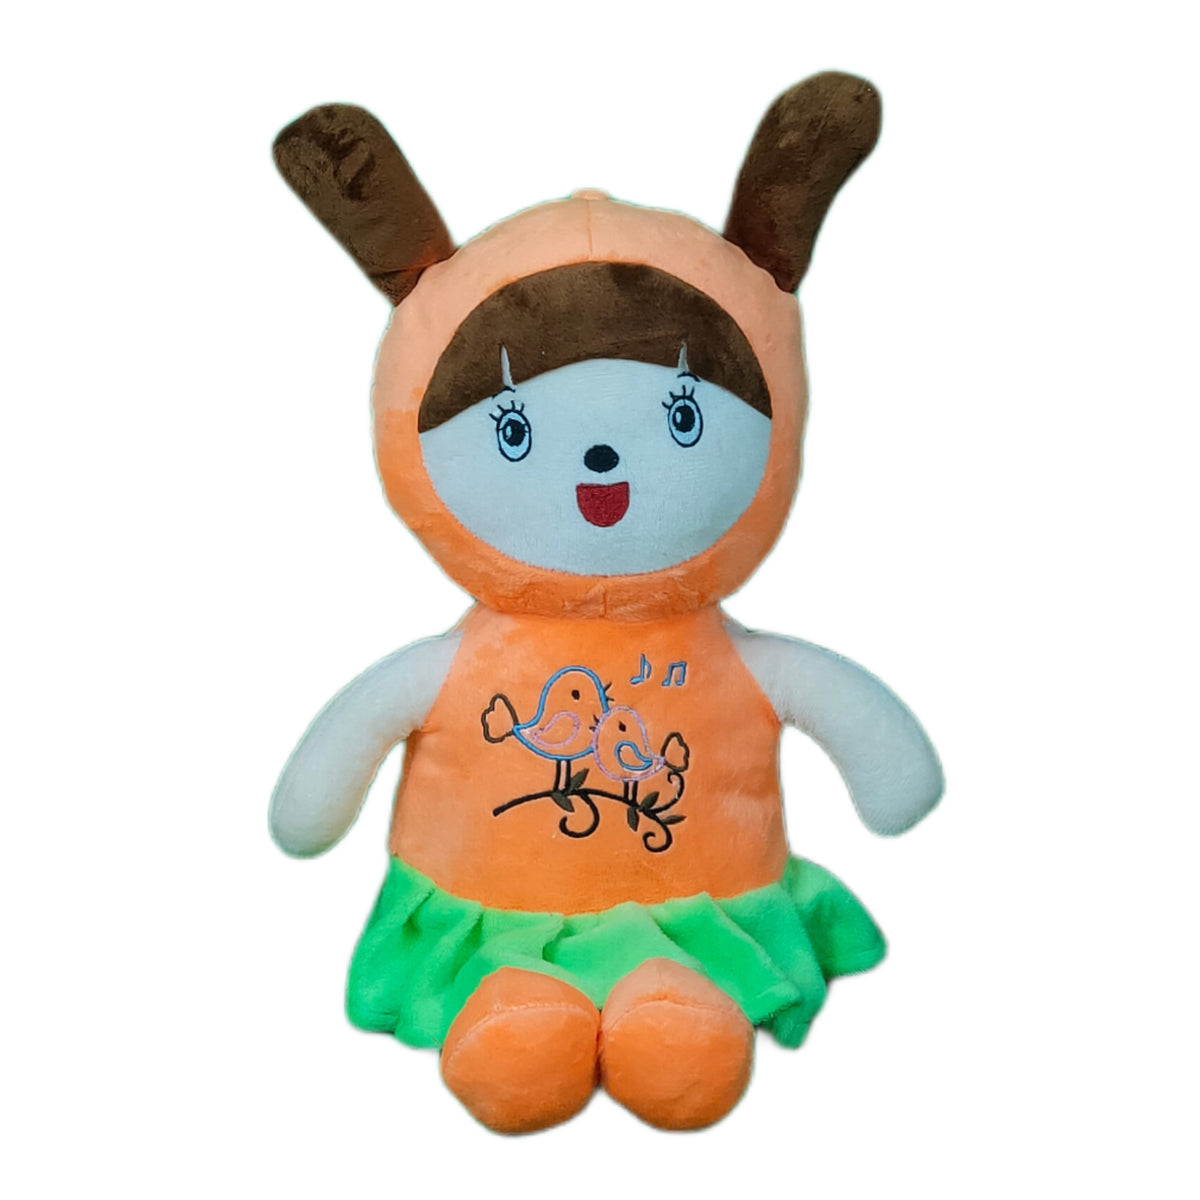 Play Hour Coco Rag Doll Plush Soft Toy Wearing Orange Frock for Ages 3 Years and Up, 45cm